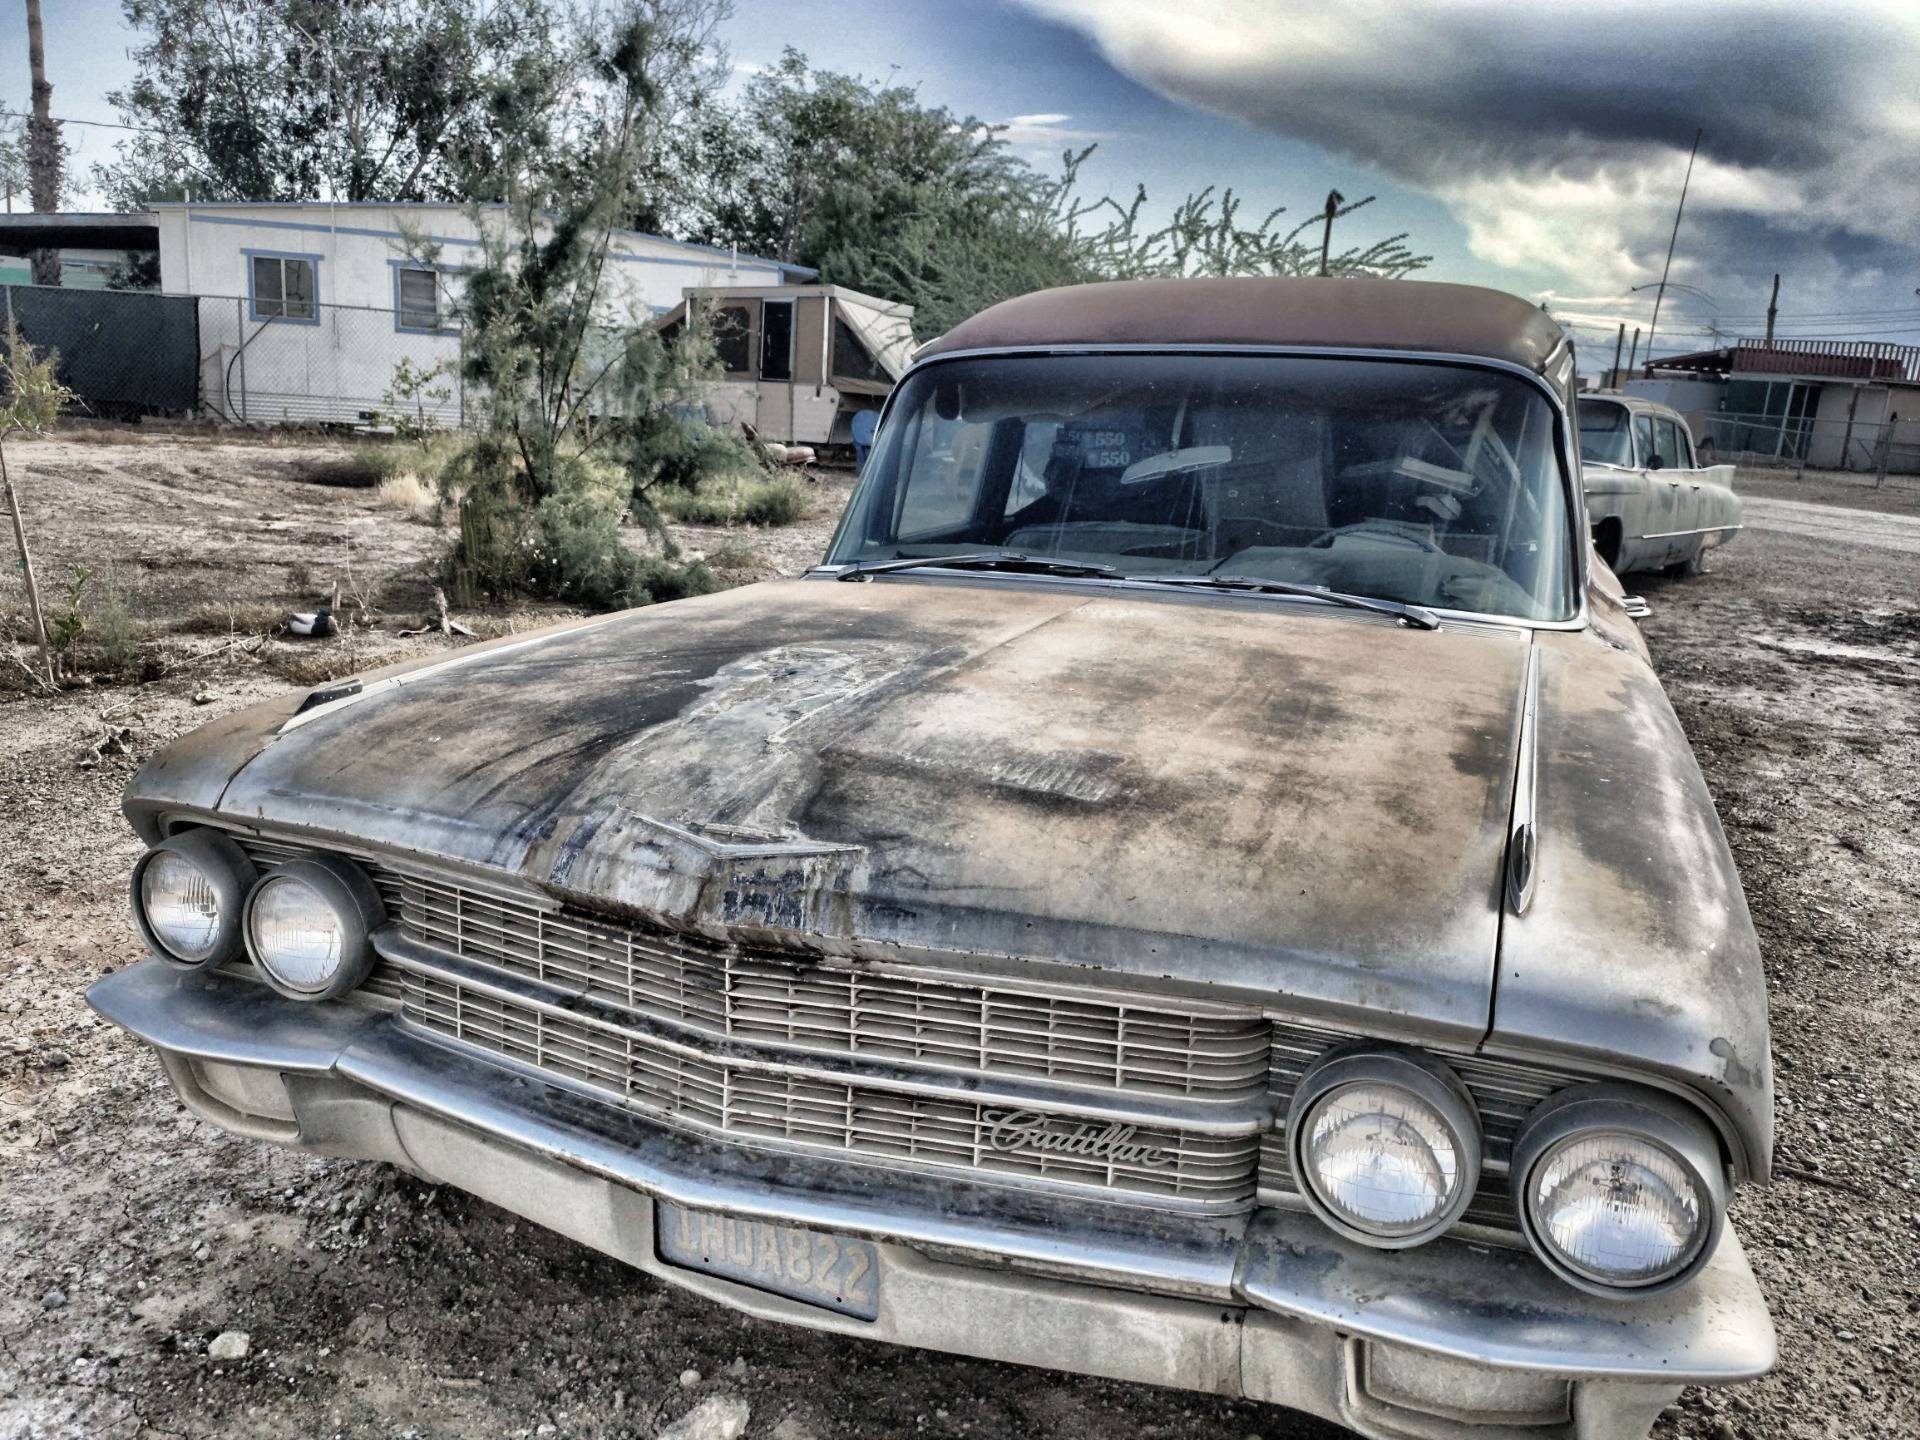 Abandoned cars: Giants made of dreams